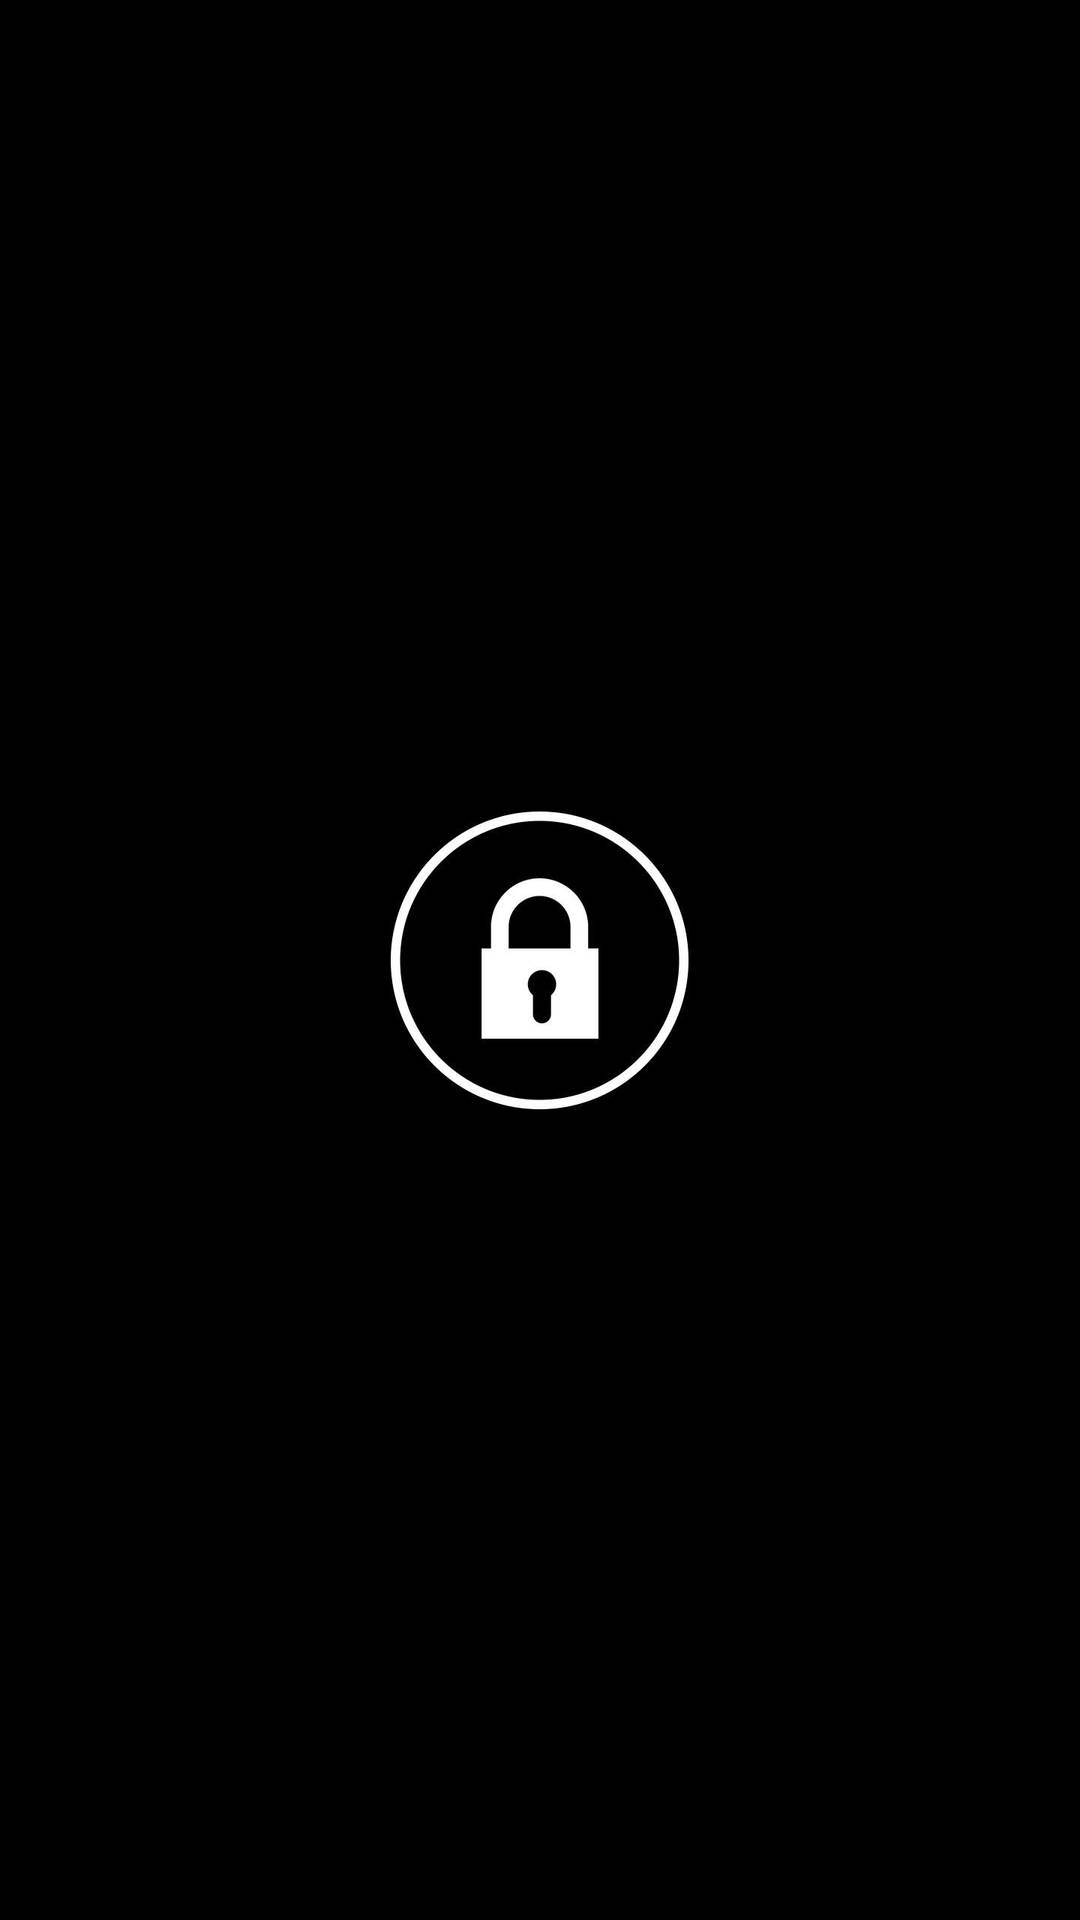 Keep your data secure with a lock screen Wallpaper